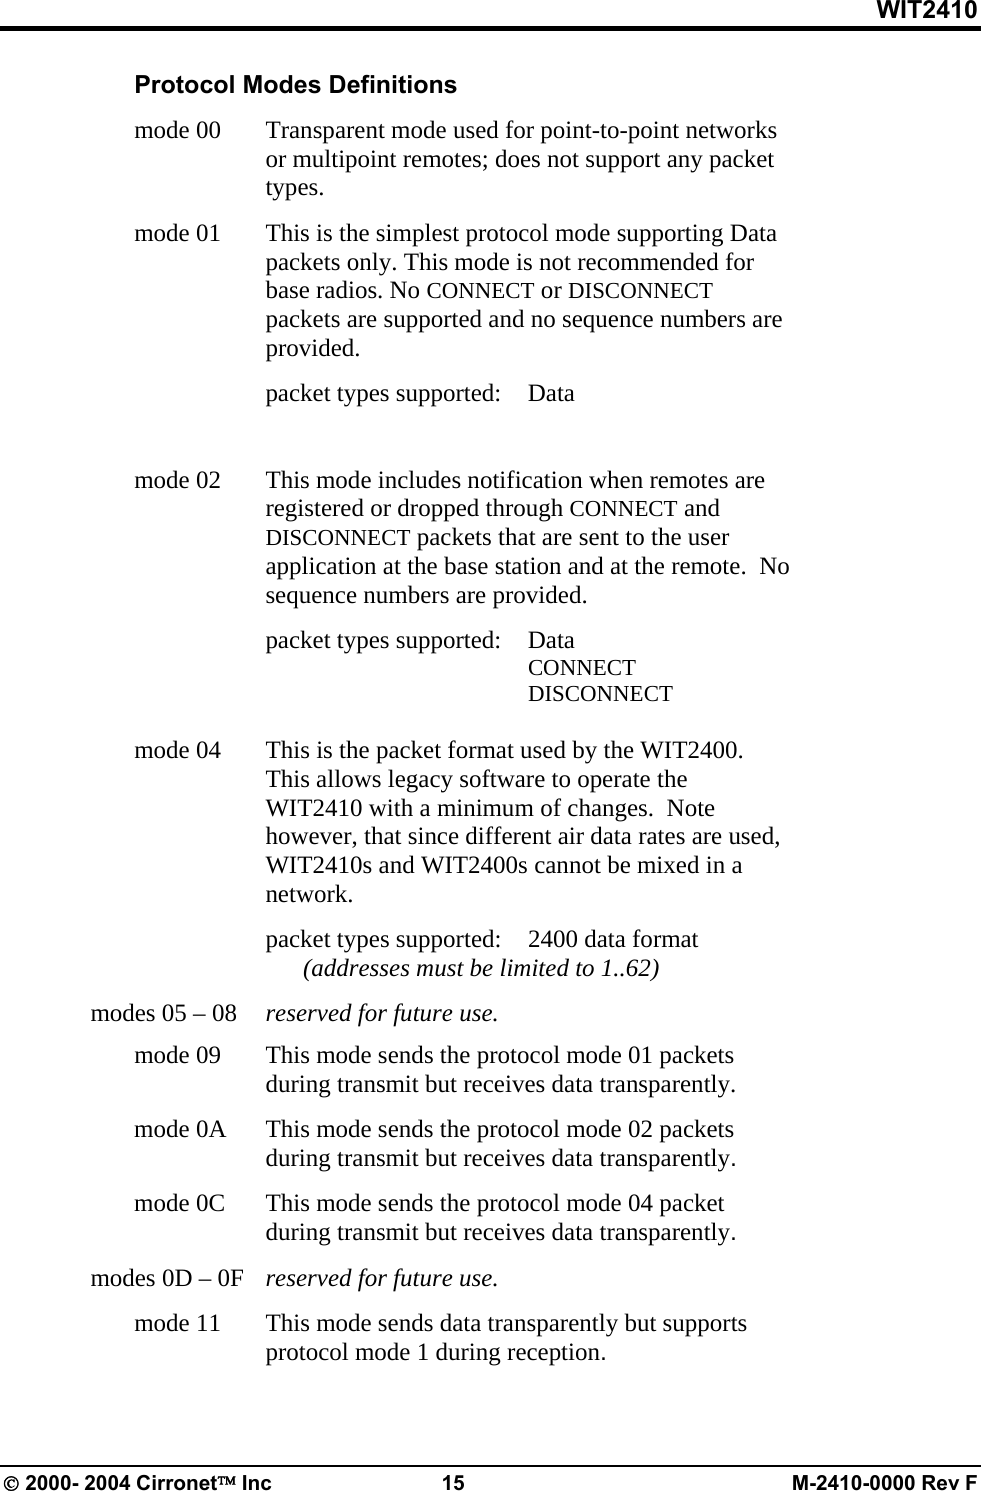 WIT2410  Protocol Modes Definitions  mode 00   Transparent mode used for point-to-point networks or multipoint remotes; does not support any packet types.  mode 01   This is the simplest protocol mode supporting Data packets only. This mode is not recommended for base radios. No CONNECT or DISCONNECT packets are supported and no sequence numbers are provided.    packet types supported: Data            mode 02   This mode includes notification when remotes are registered or dropped through CONNECT and DISCONNECT packets that are sent to the user application at the base station and at the remote.  No sequence numbers are provided.    packet types supported: Data        CONNECT        DISCONNECT               mode 04   This is the packet format used by the WIT2400.  This allows legacy software to operate the WIT2410 with a minimum of changes.  Note however, that since different air data rates are used, WIT2410s and WIT2400s cannot be mixed in a network.      packet types supported:  2400 data format       (addresses must be limited to 1..62)   modes 05 – 08   reserved for future use.   mode 09   This mode sends the protocol mode 01 packets during transmit but receives data transparently.   mode 0A   This mode sends the protocol mode 02 packets during transmit but receives data transparently.   mode 0C   This mode sends the protocol mode 04 packet during transmit but receives data transparently.   modes 0D – 0F   reserved for future use.   mode 11   This mode sends data transparently but supports protocol mode 1 during reception. © 2000- 2004 Cirronet™ Inc  15  M-2410-0000 Rev F 